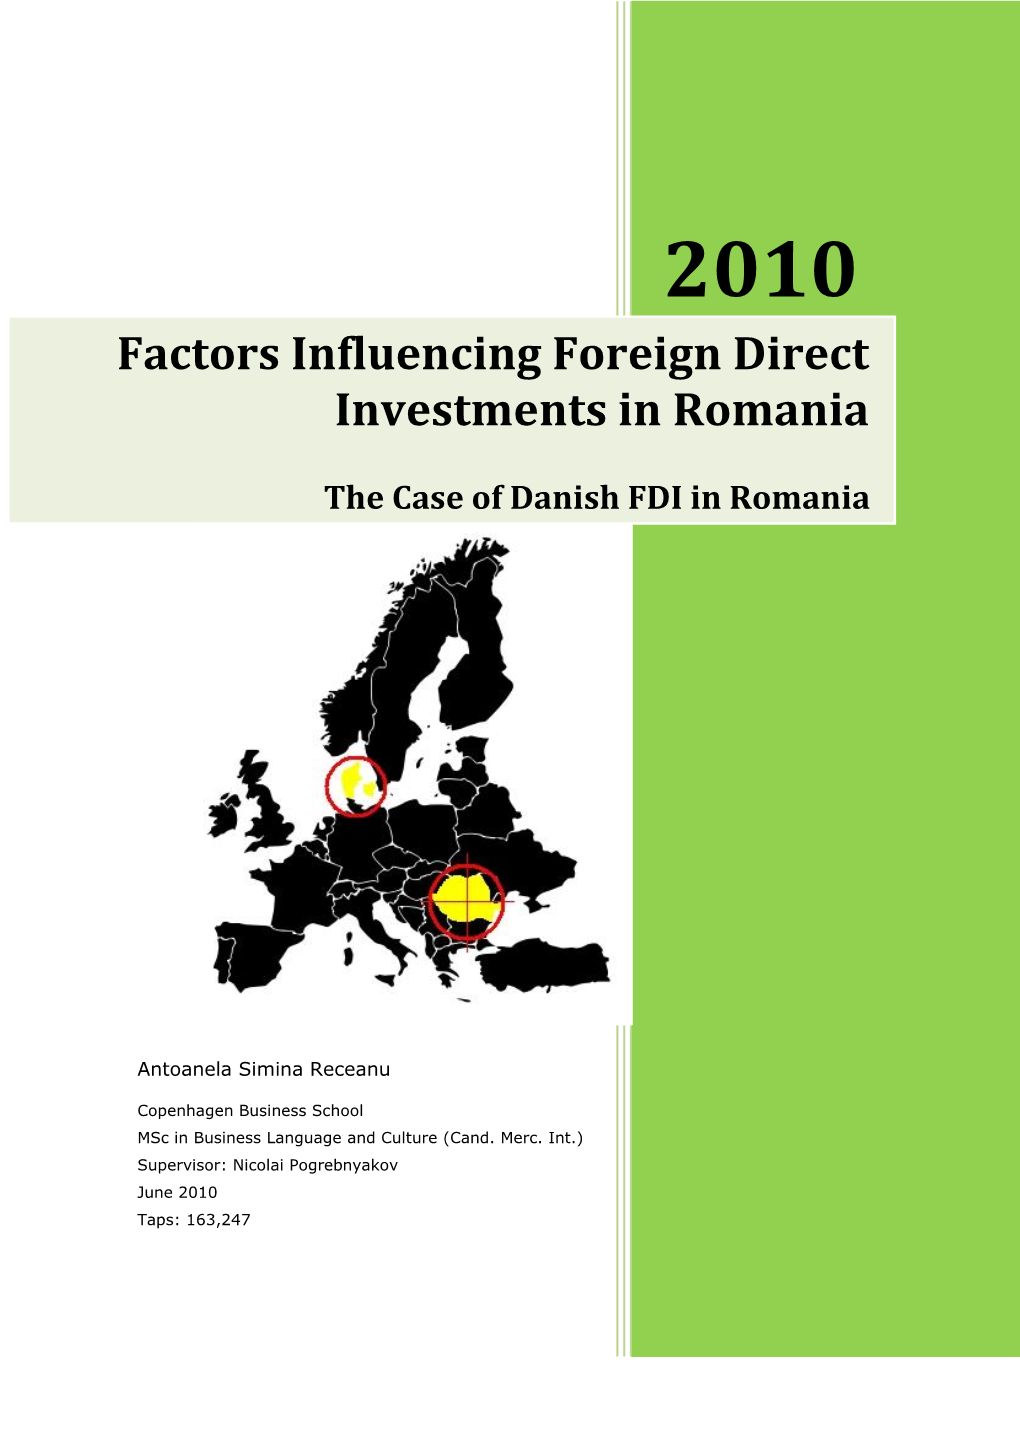 Factors Influencing Foreign Direct Investments in Romania